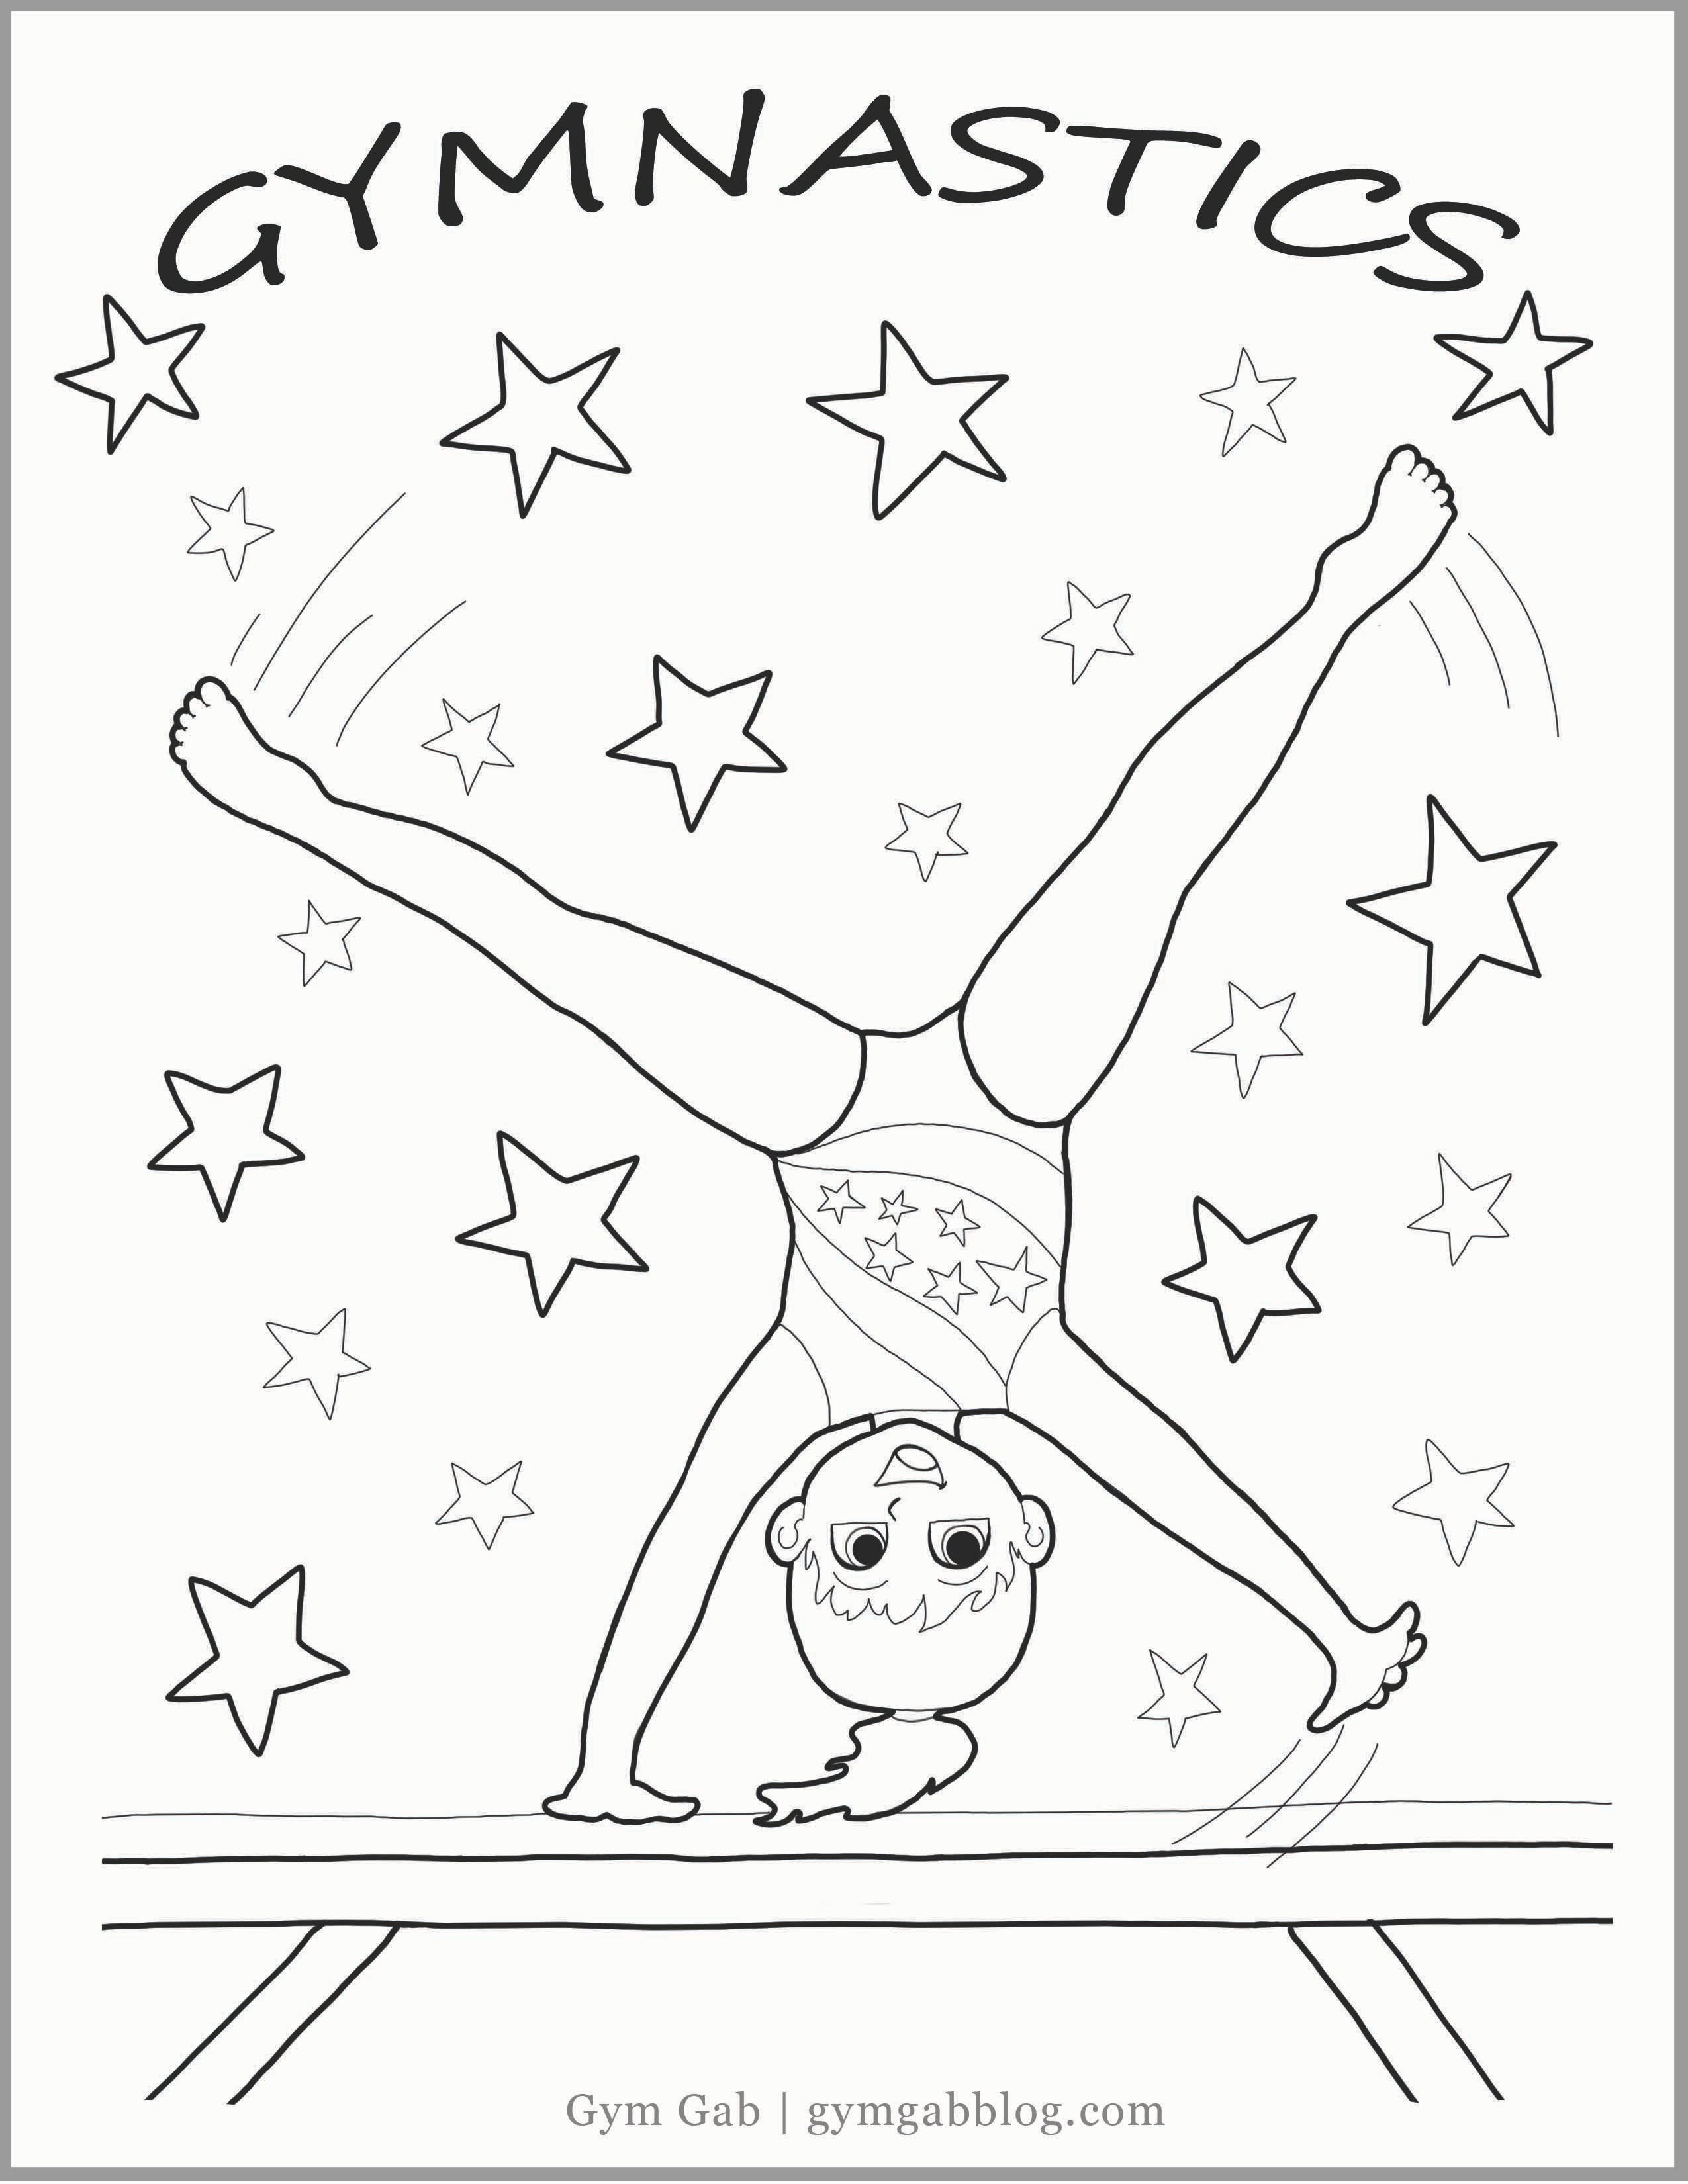 I Love Gymnastics Coloring Pages 4th Of July Coloring Pages Happy 4th